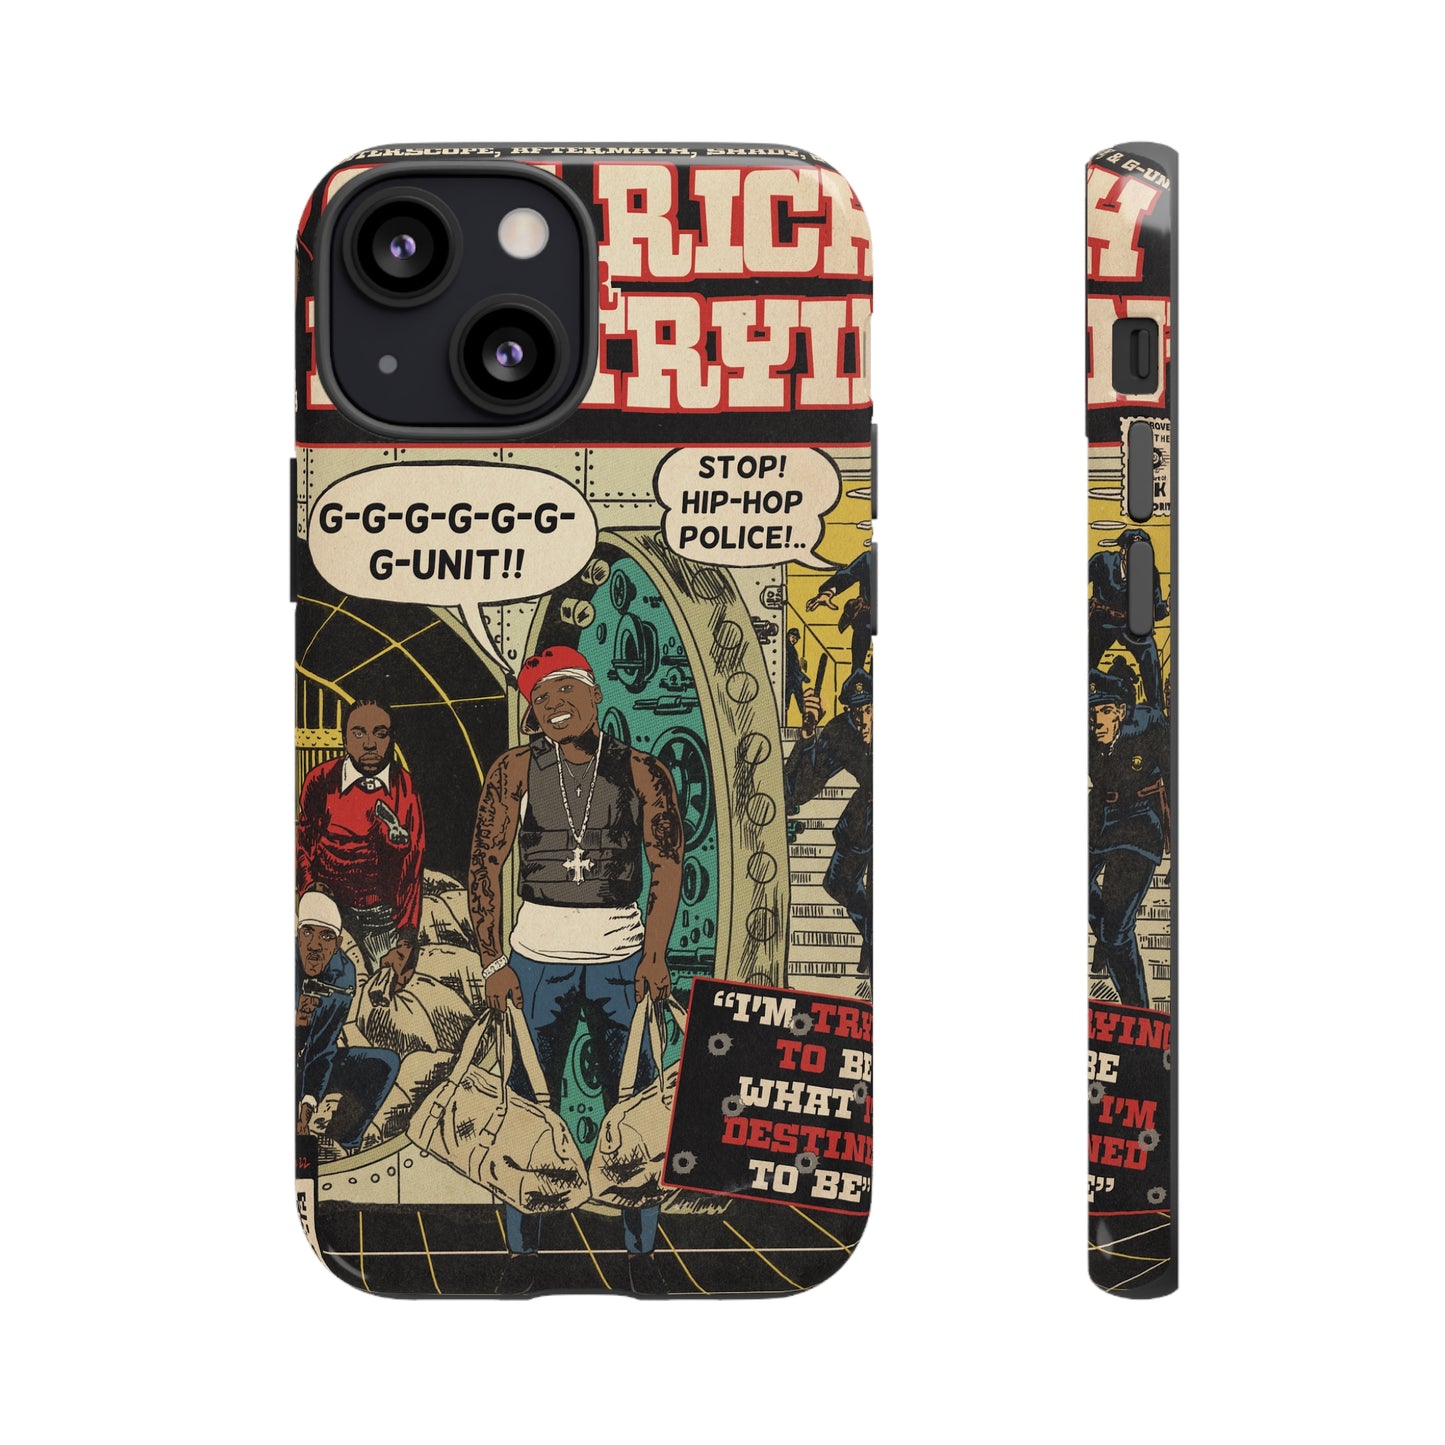 50 Cent - Get Rich Or Die Tryin - Comic Art Tough Phone Cases